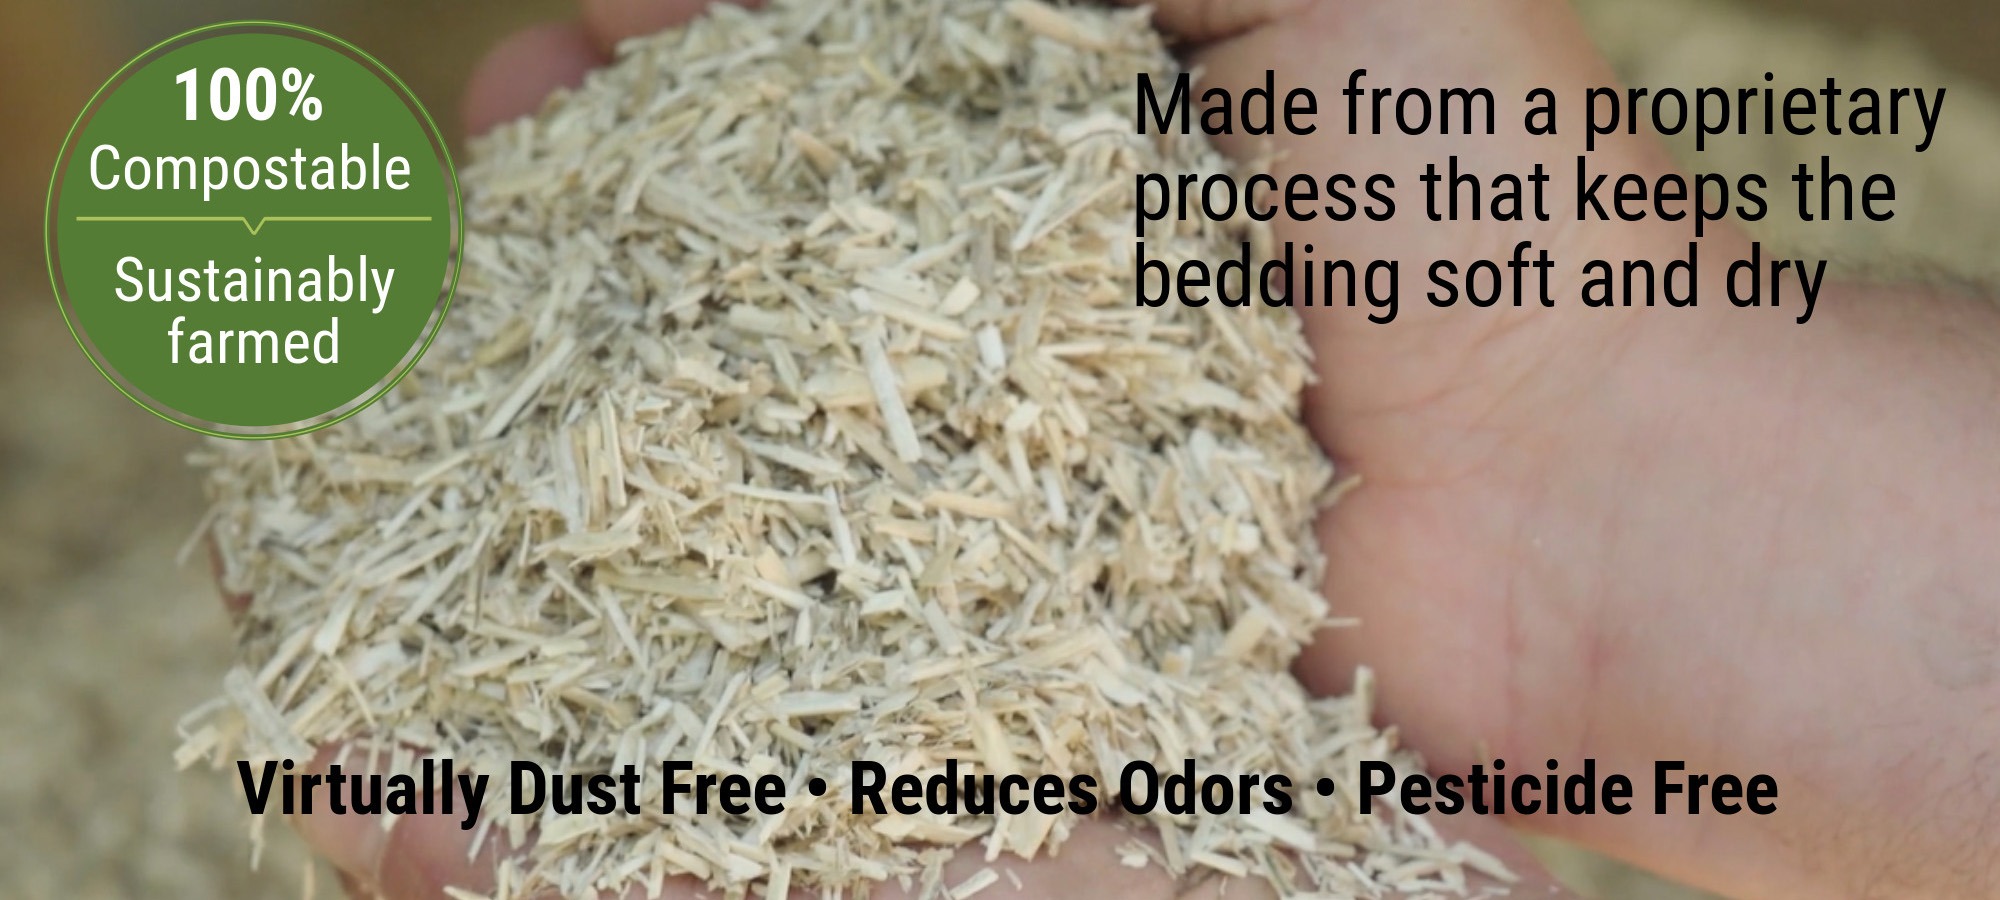 our hemp bedding is made from a proprietary process keeping it soft and dry